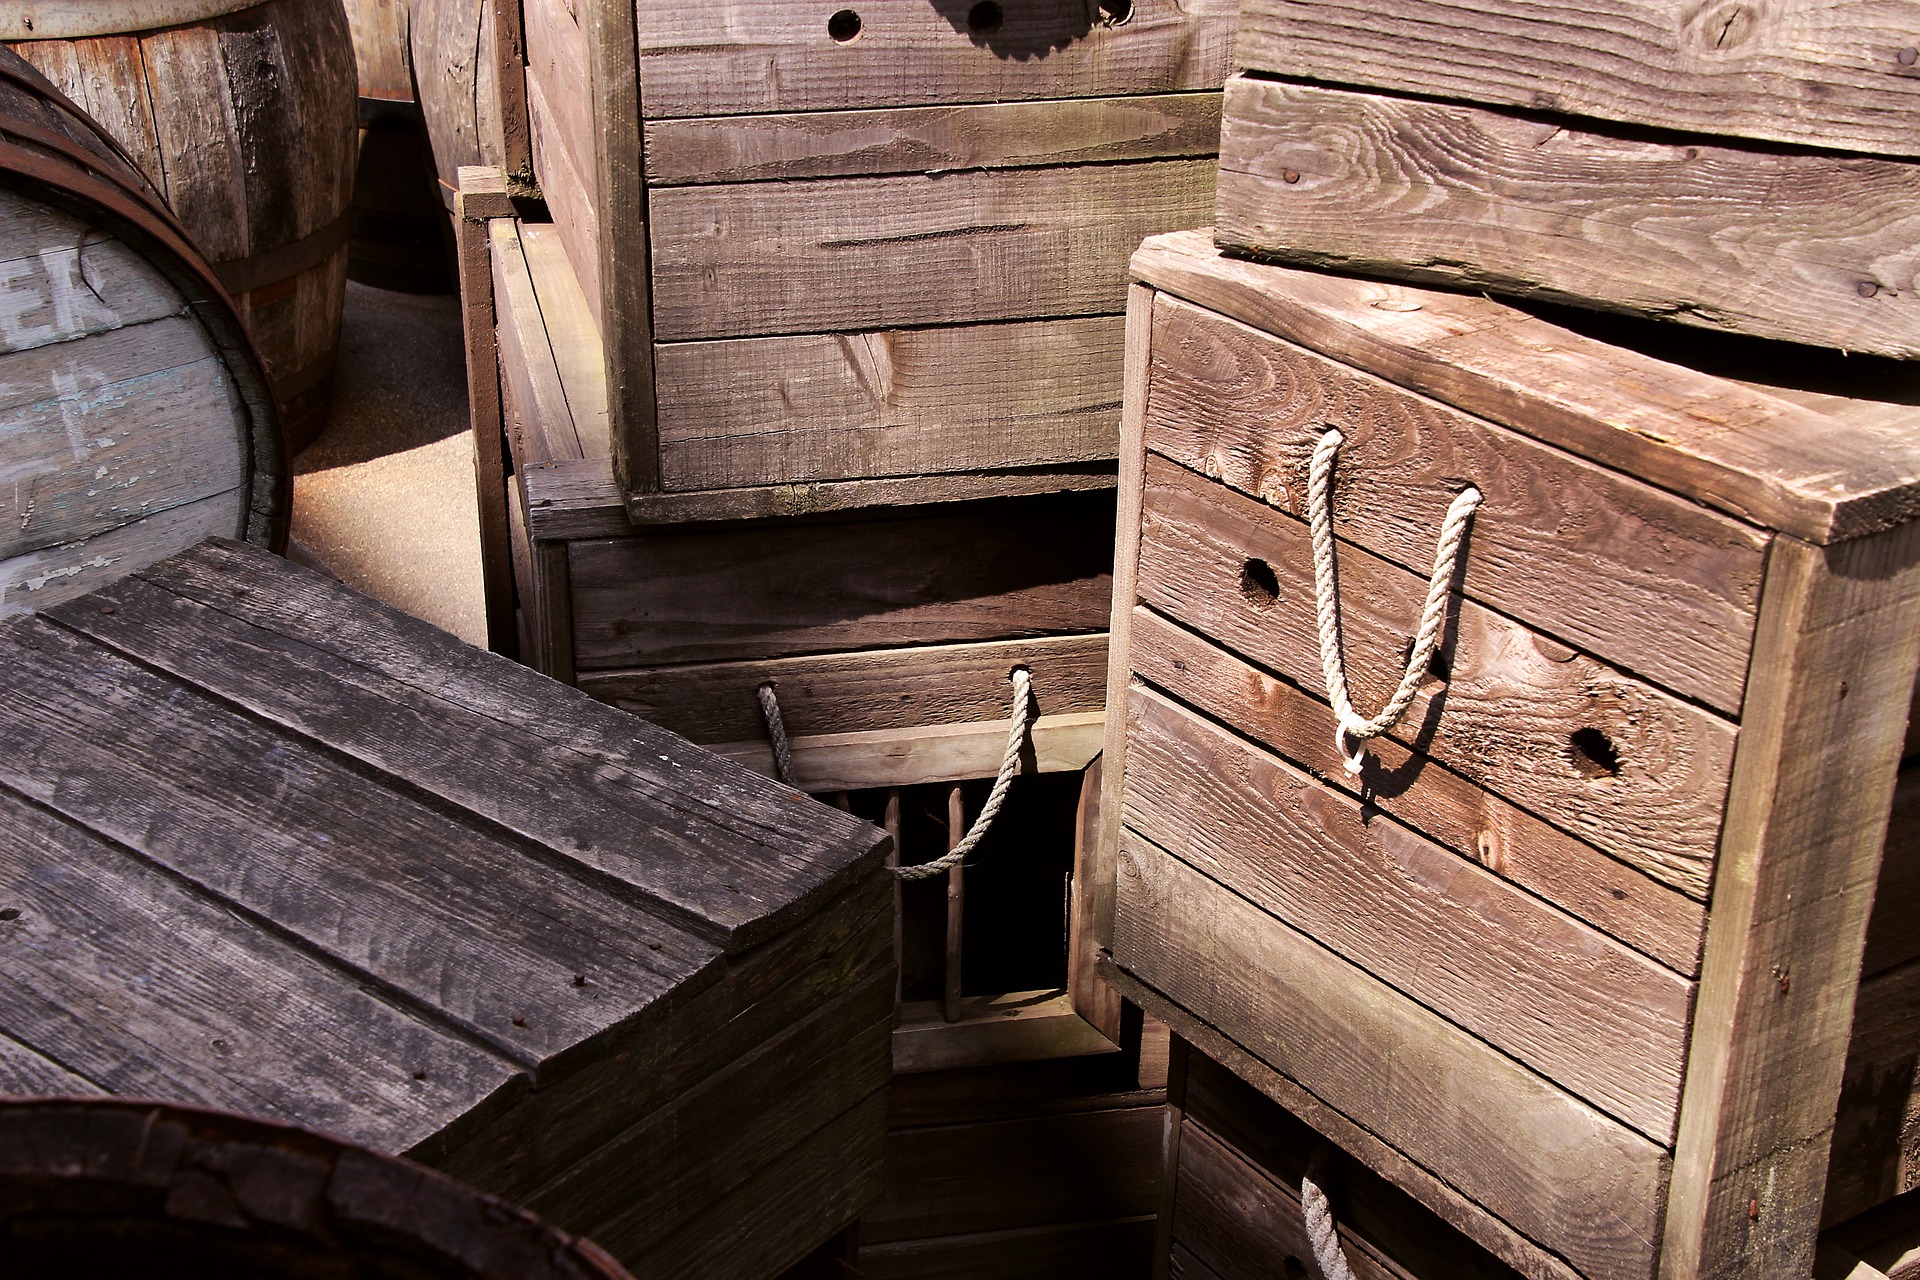 Virtual Machines - wooden boxes on the ship